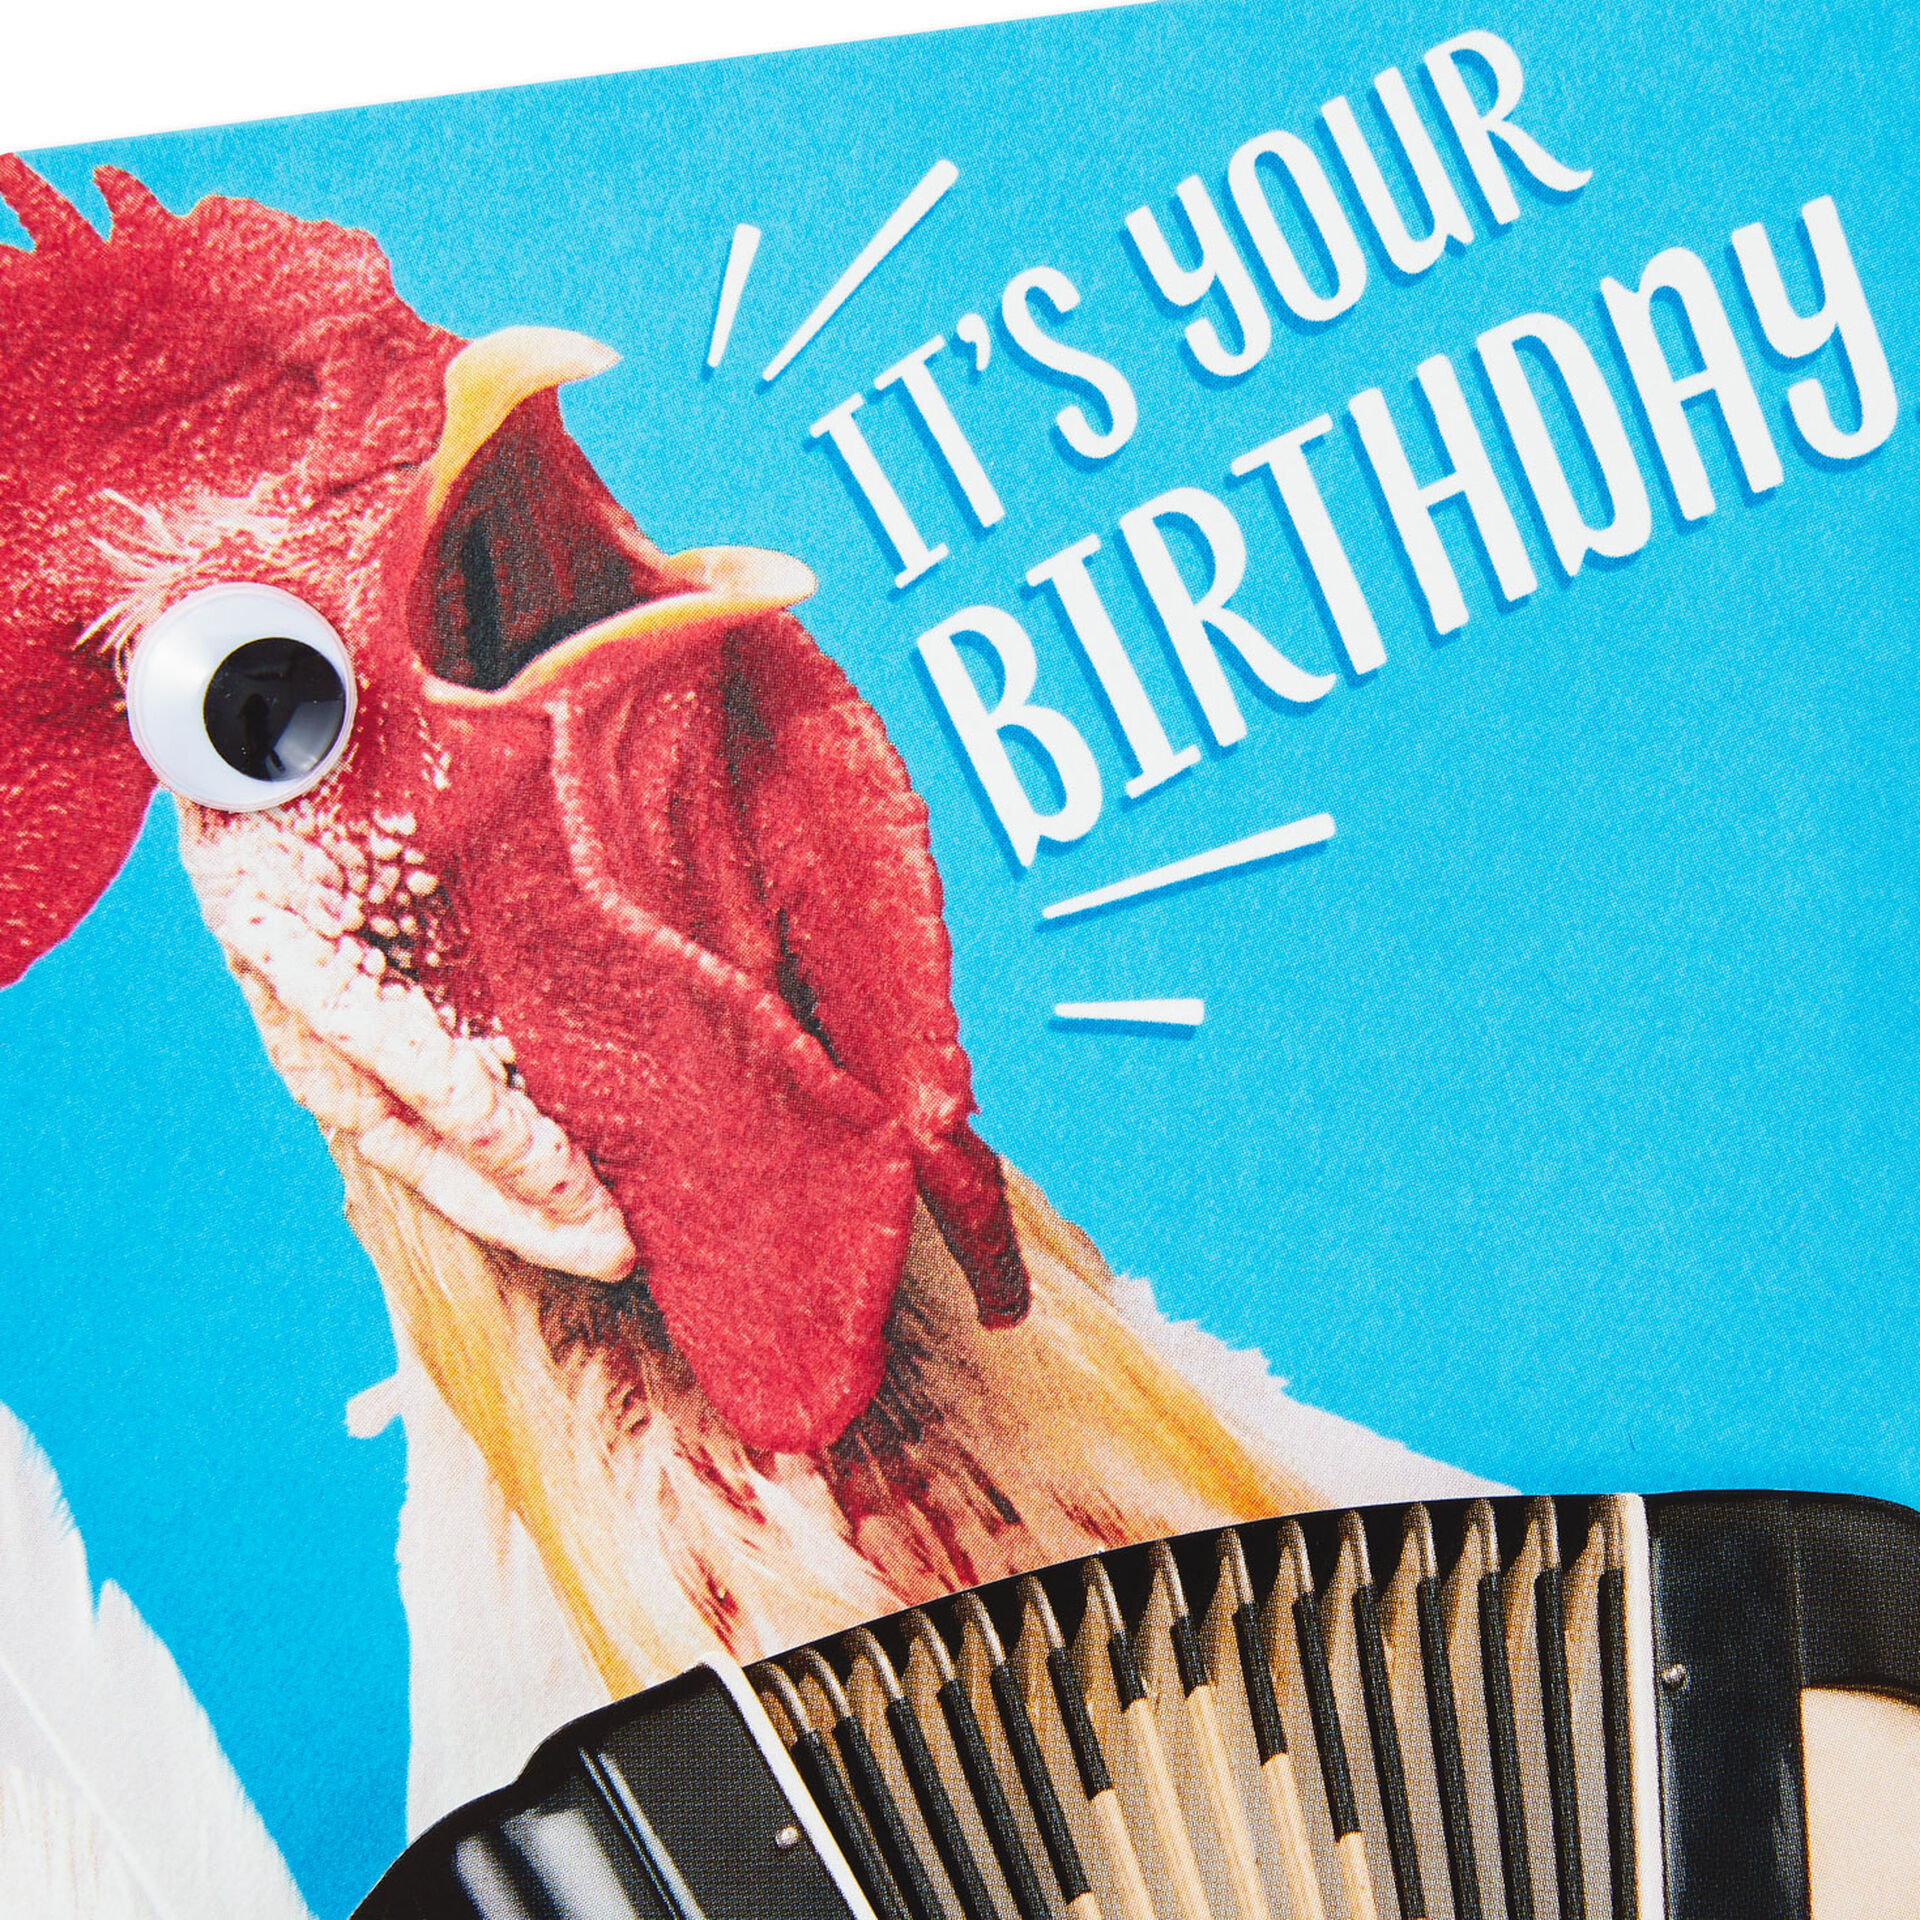 Chicken Dance Funny Musical Birthday Card With Motion - Greeting Cards